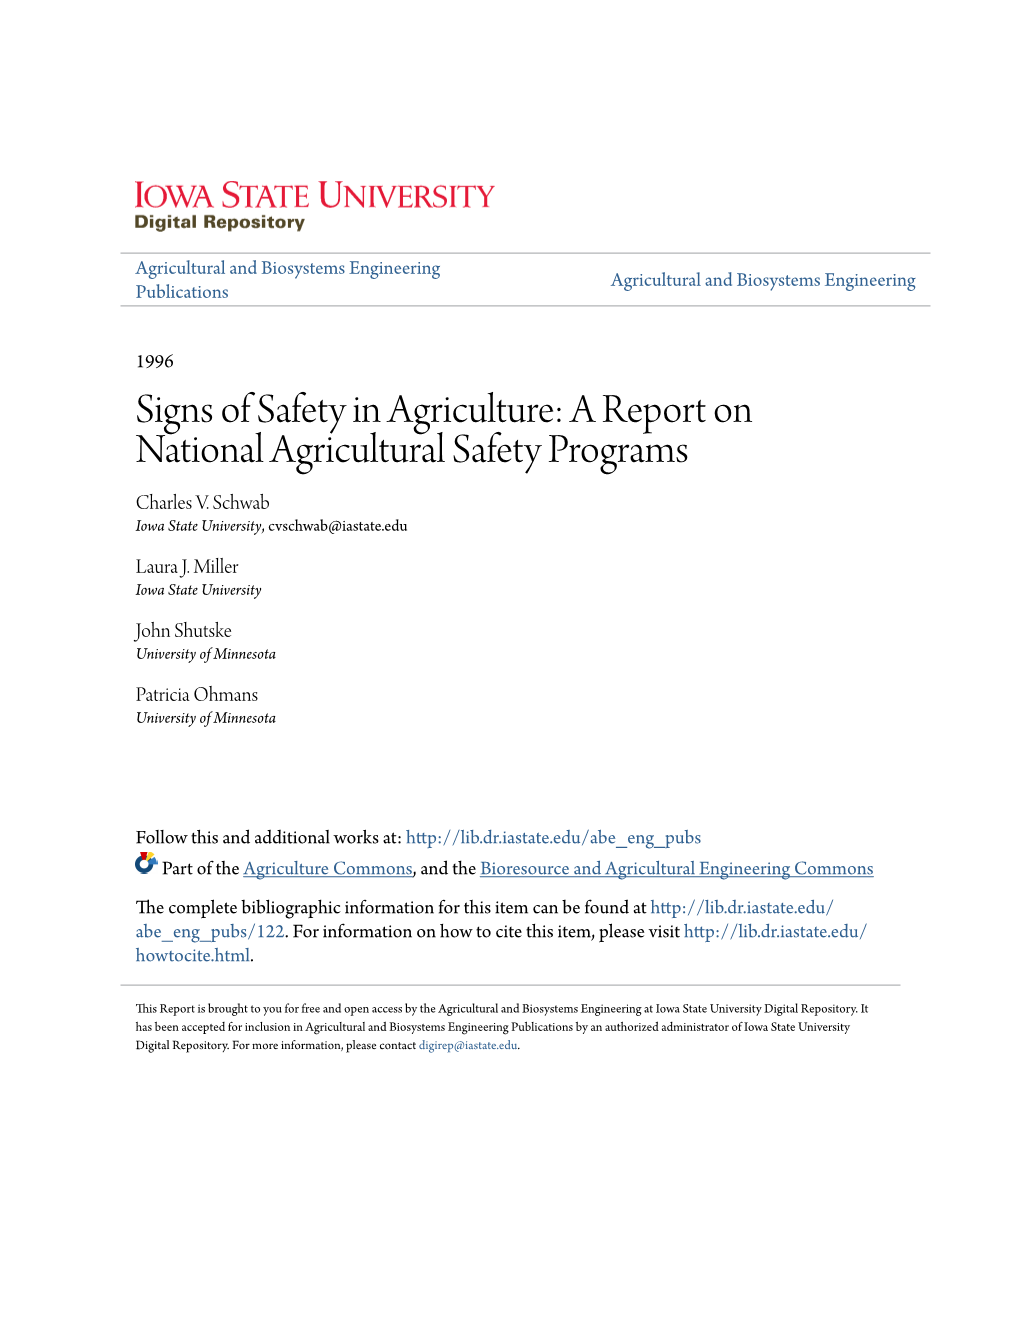 Signs of Safety in Agriculture: a Report on National Agricultural Safety Programs Charles V